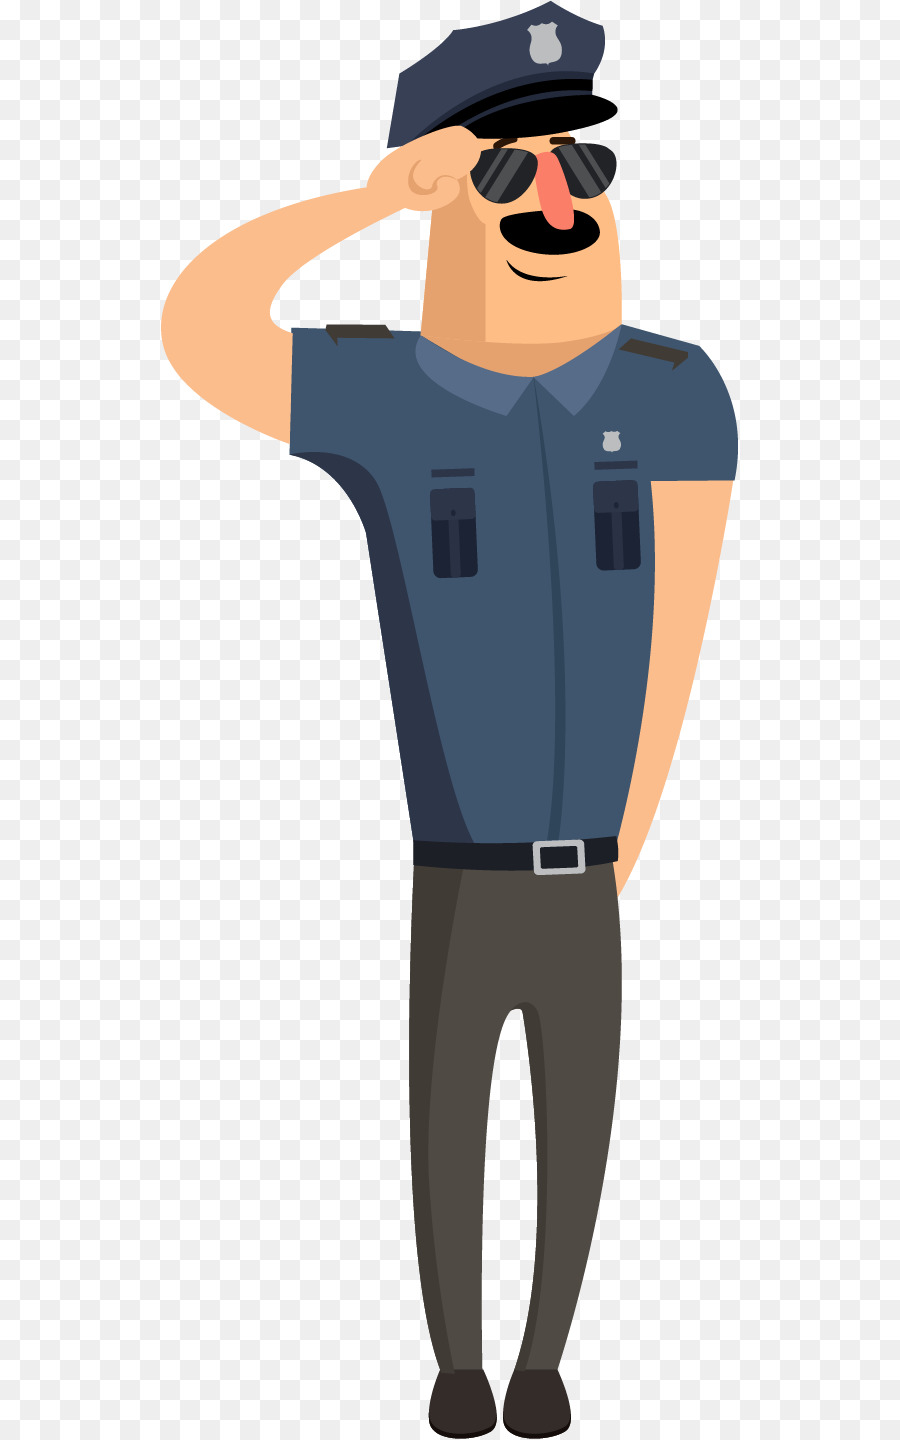 Police officer Security guard - Police guard png download - 577*1439 - Free Transparent Police png Download.